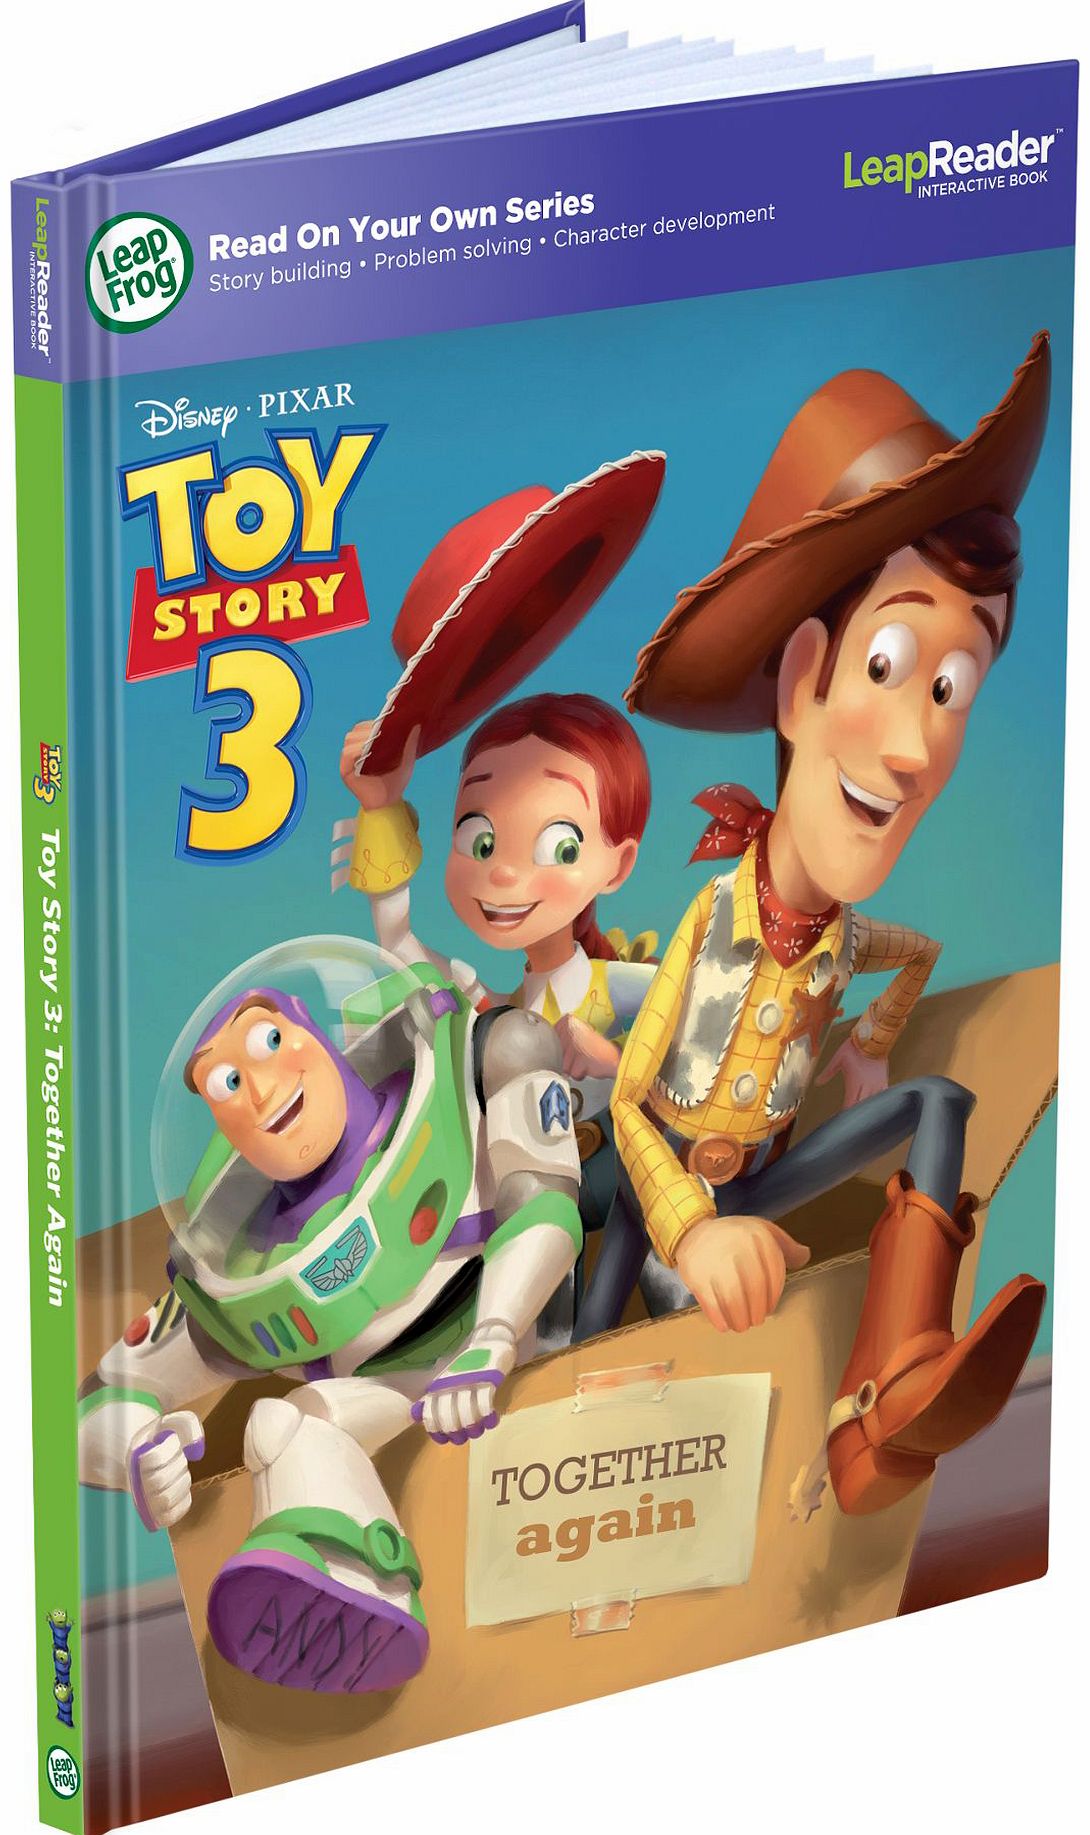 Tag Book Toy Story 3 Together Again